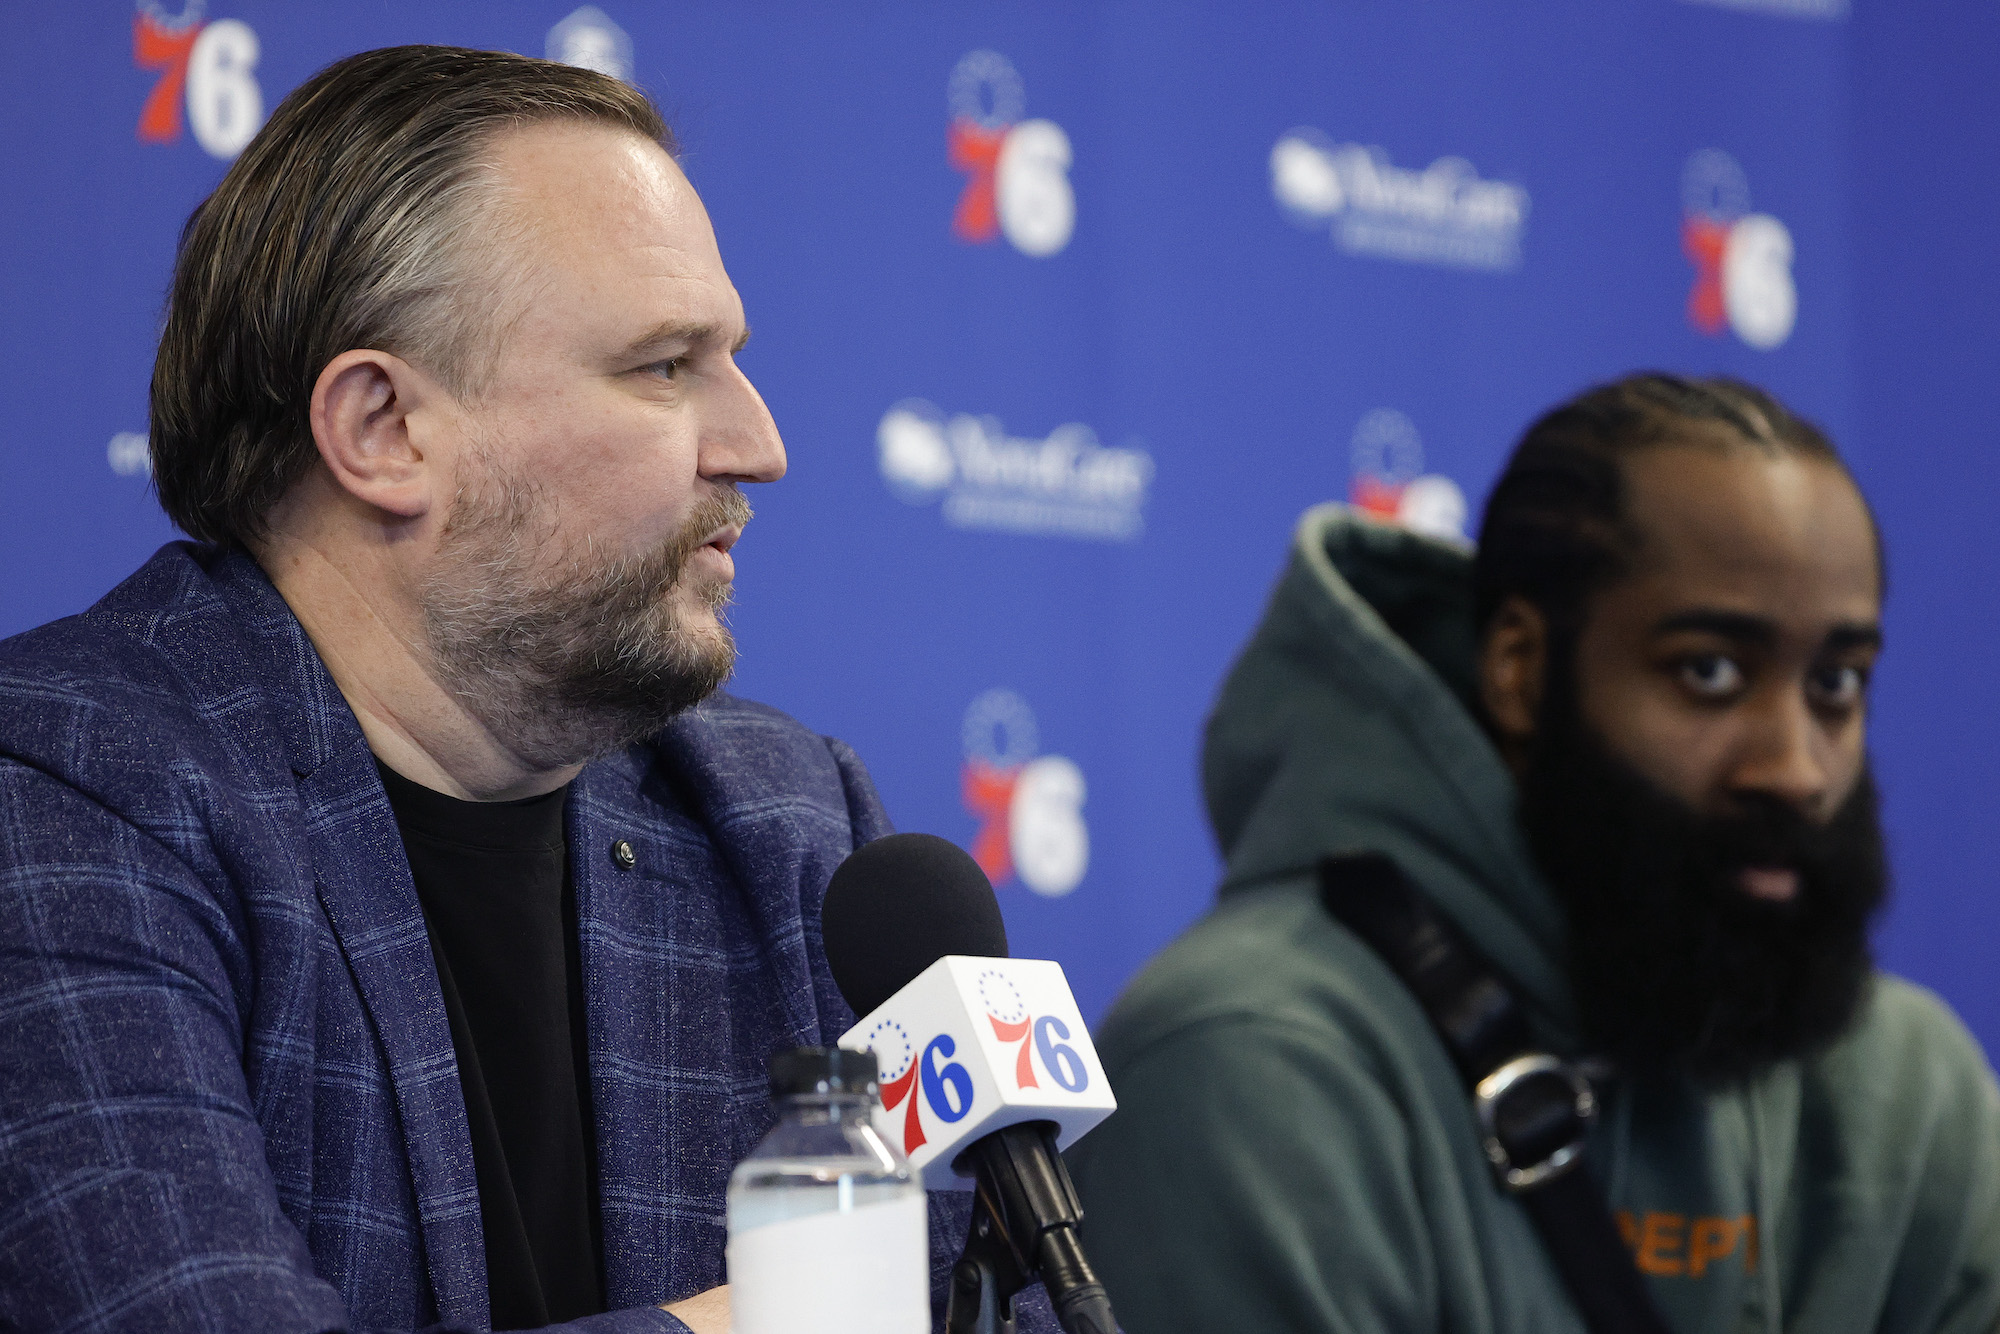 CAMDEN, NEW JERSEY - FEBRUARY 15: President of basketball operations Daryl Morey responds during a press conference at the Seventy Sixers Practice Facility on February 15, 2022 in Camden, New Jersey. (Photo by Tim Nwachukwu/Getty Images) NOTE TO USER: User expressly acknowledges and agrees that, by downloading and or using this photograph, User is consenting to the terms and conditions of the Getty Images License Agreement.